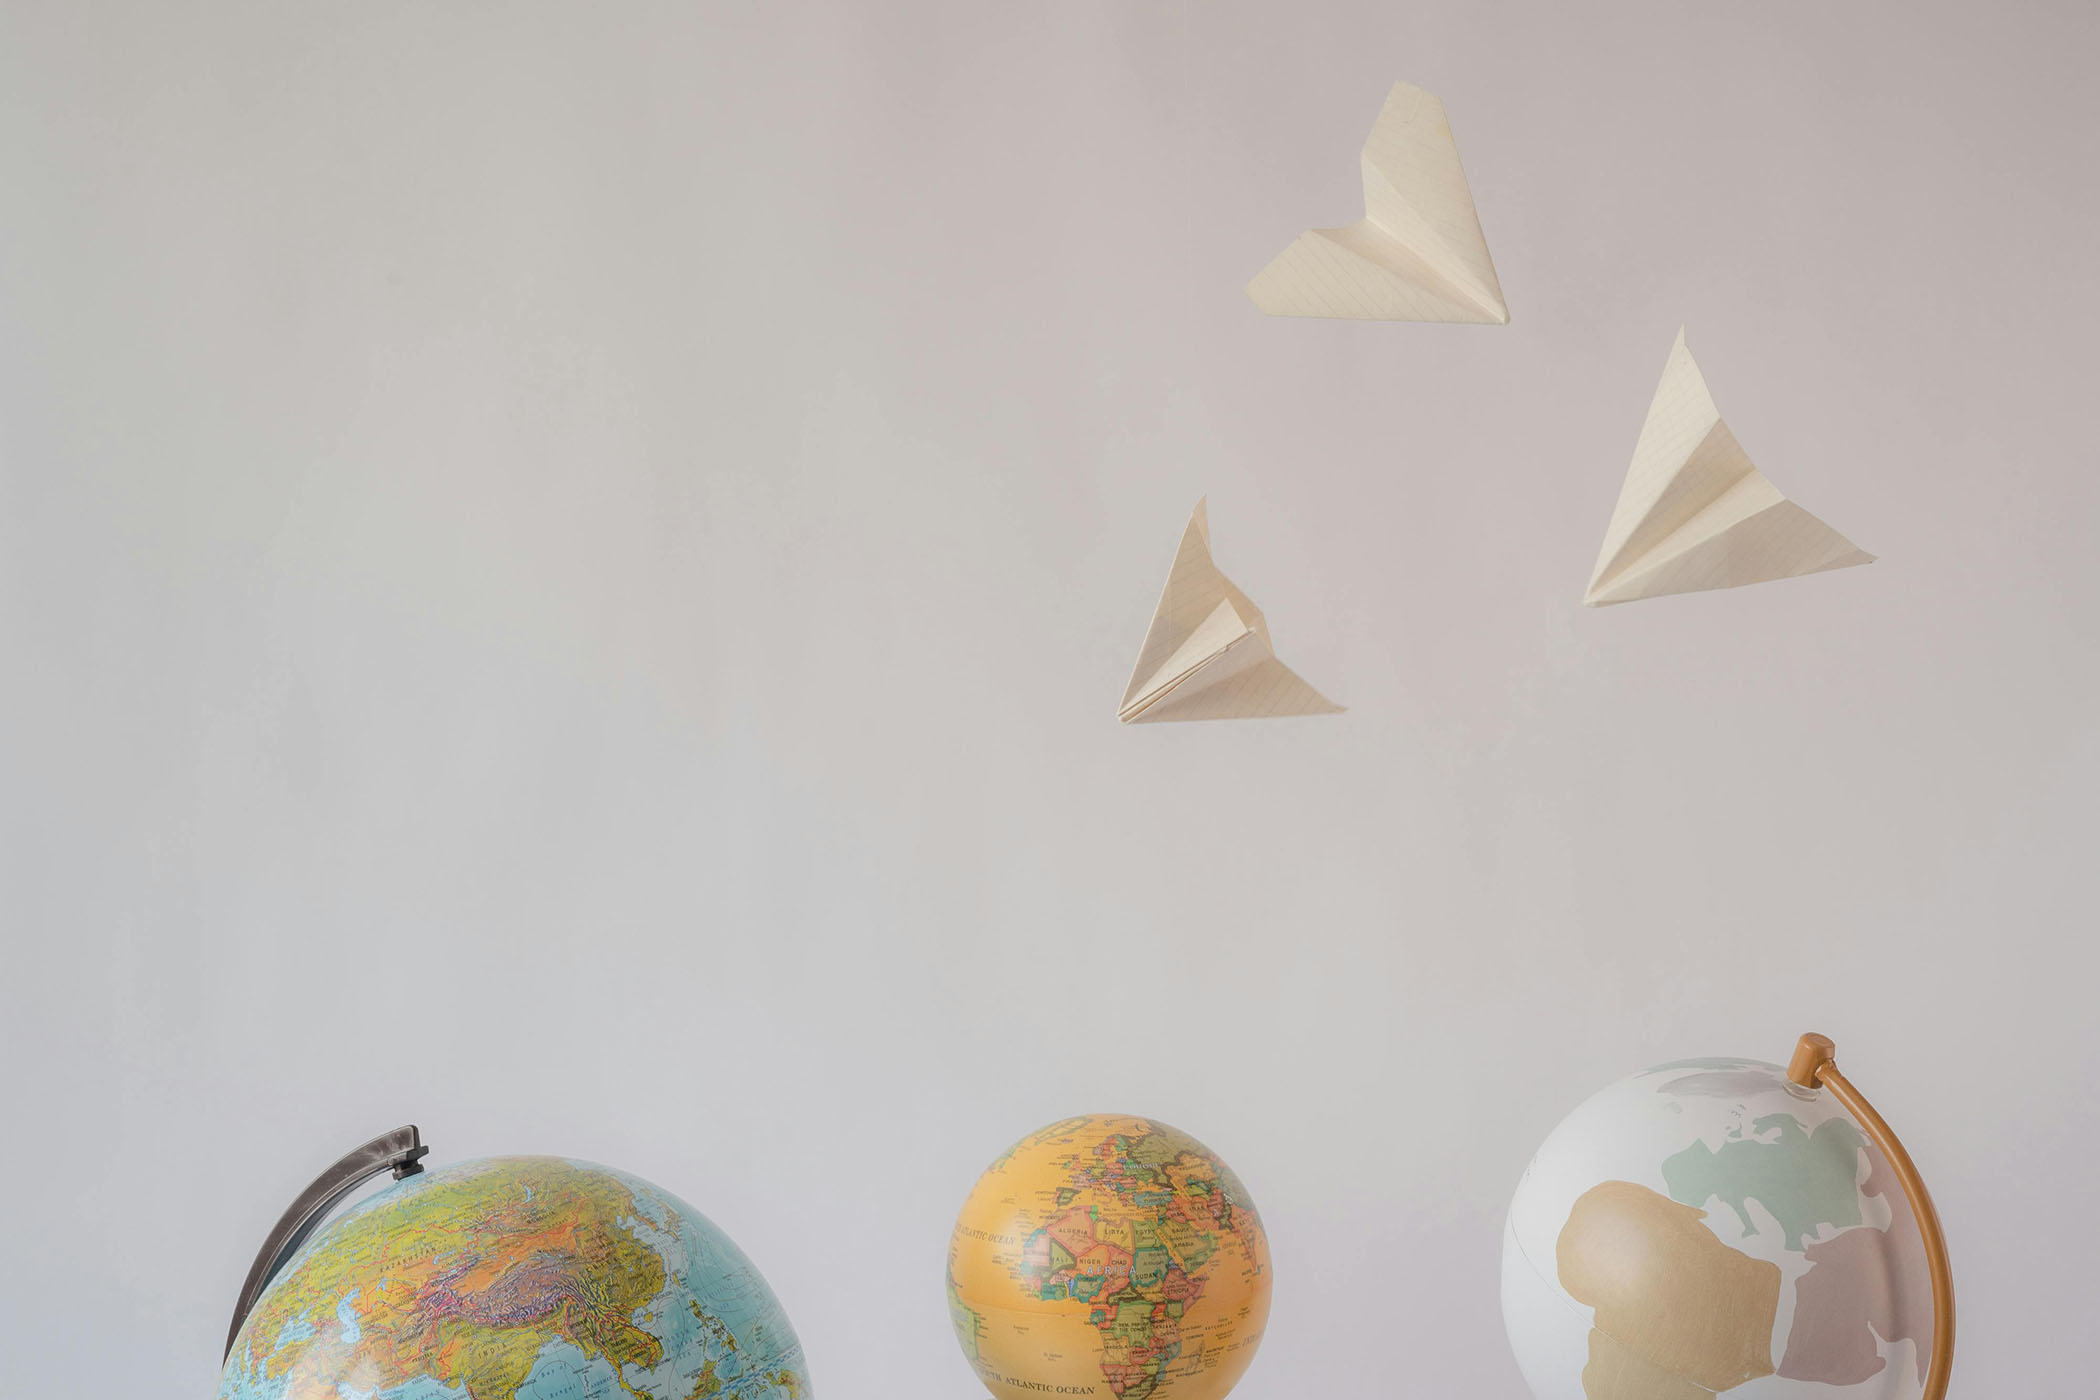 Paper airplanes and world globes